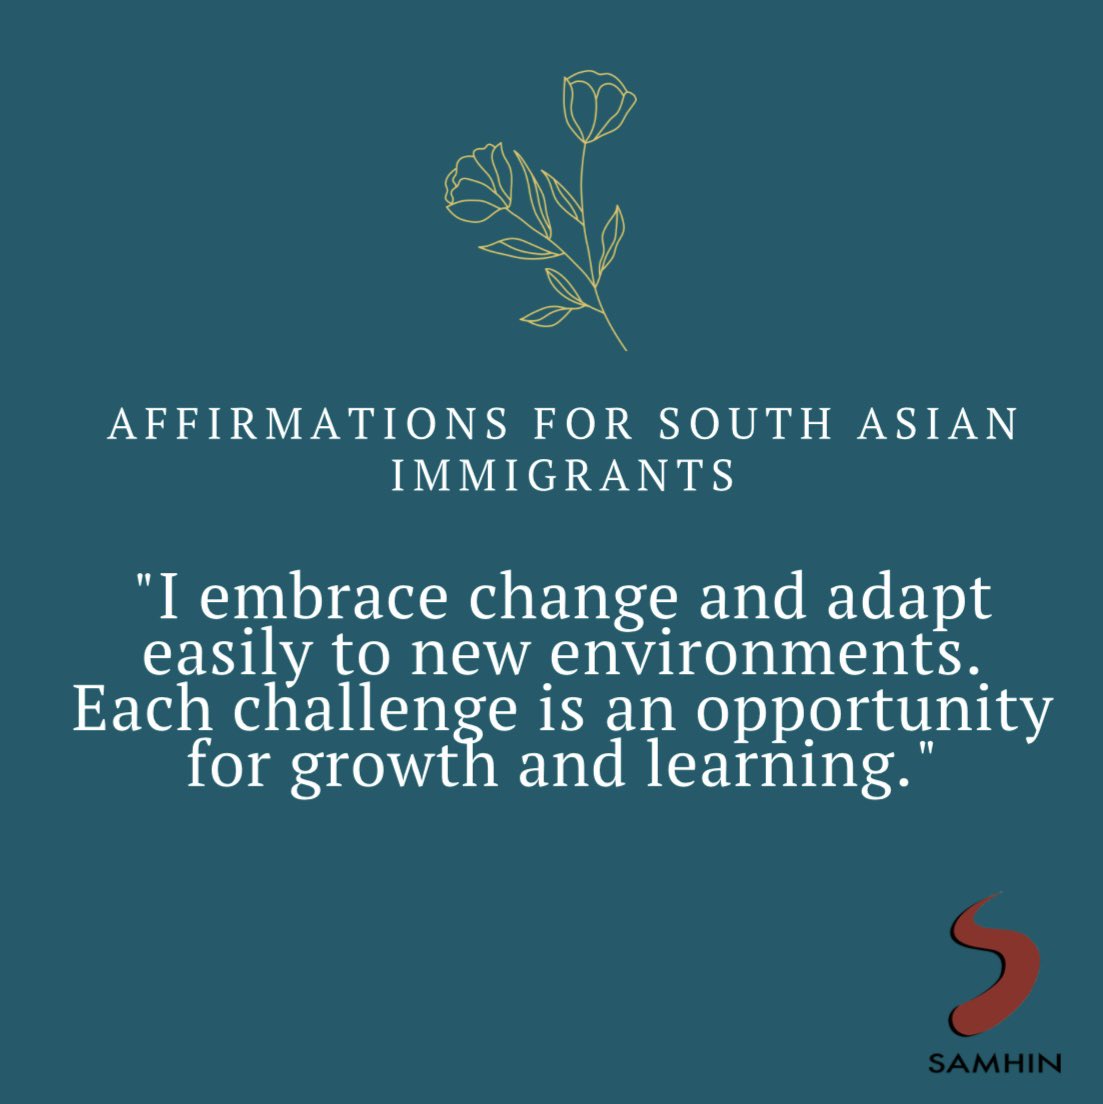 Adaptability, now that’s a super power, agree? 
.
.
.
.
#southasians #southasianmentalhealth #southasiantherapist #southasianimmigrants #southasianmentalhealthissues #mentalhealth #affirmations #southasianaffirmations #immigrantlife #immigrantstories